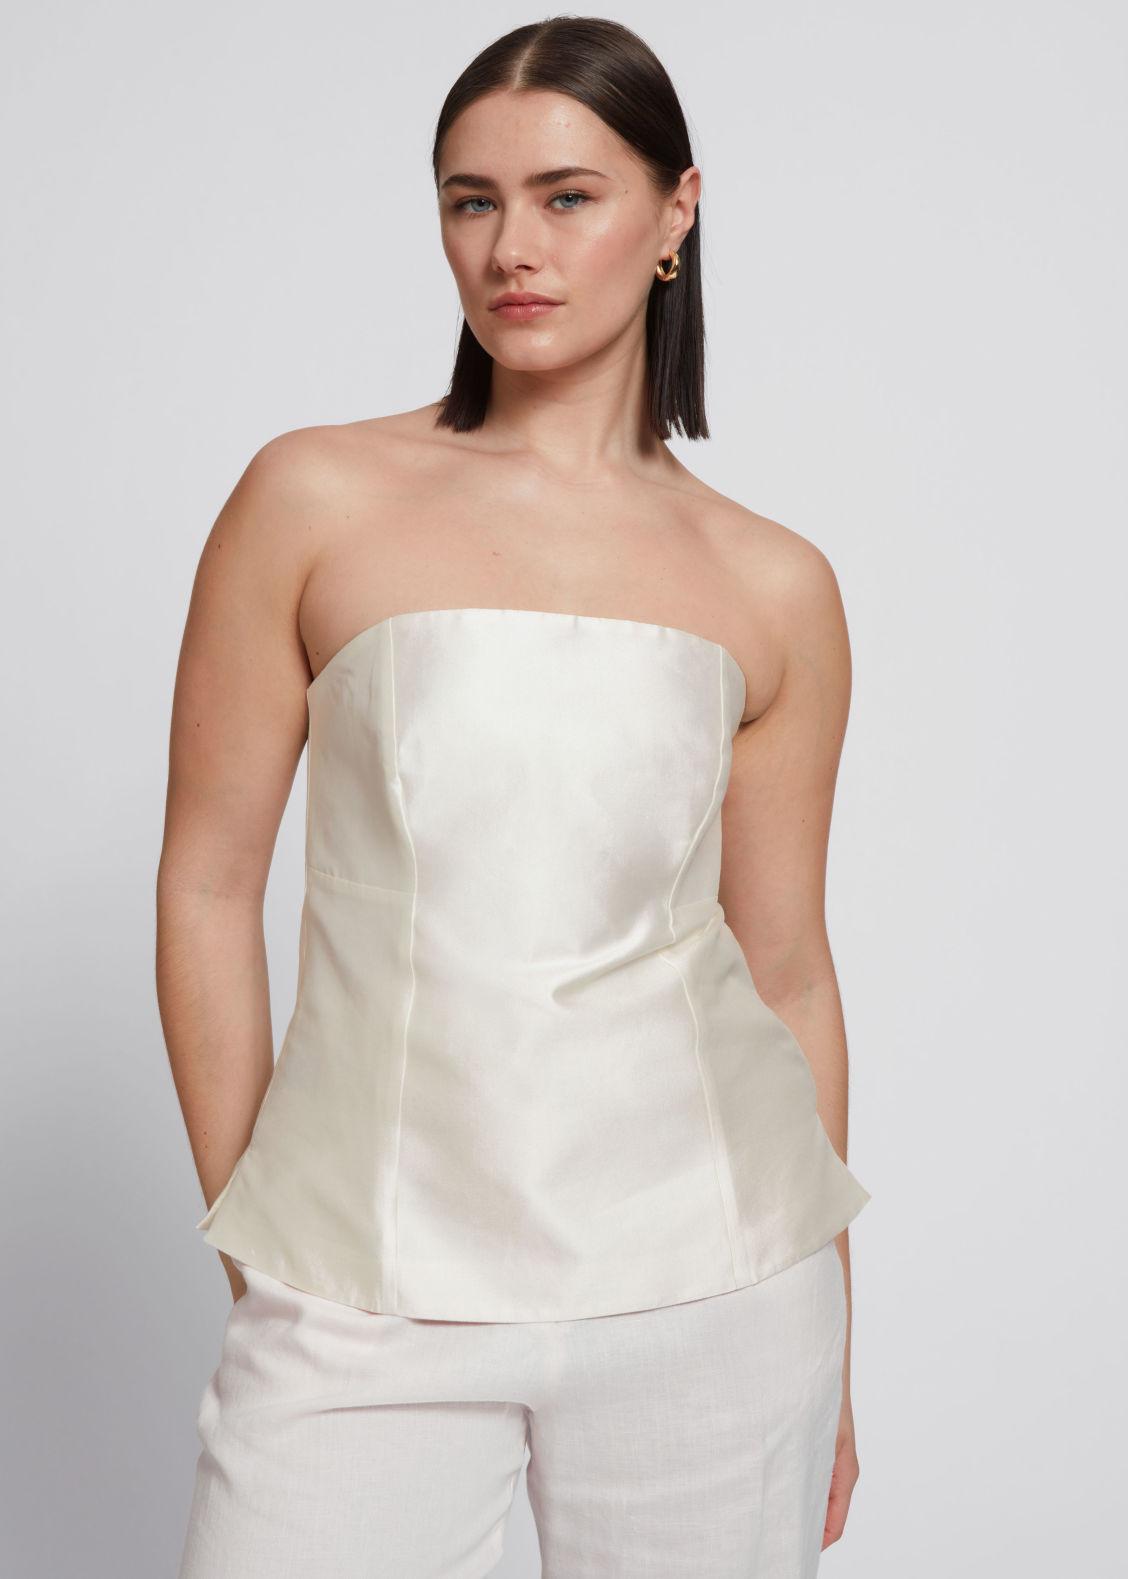 & Other Stories Fitted Mulberry Silk Tube Top in White | Lyst